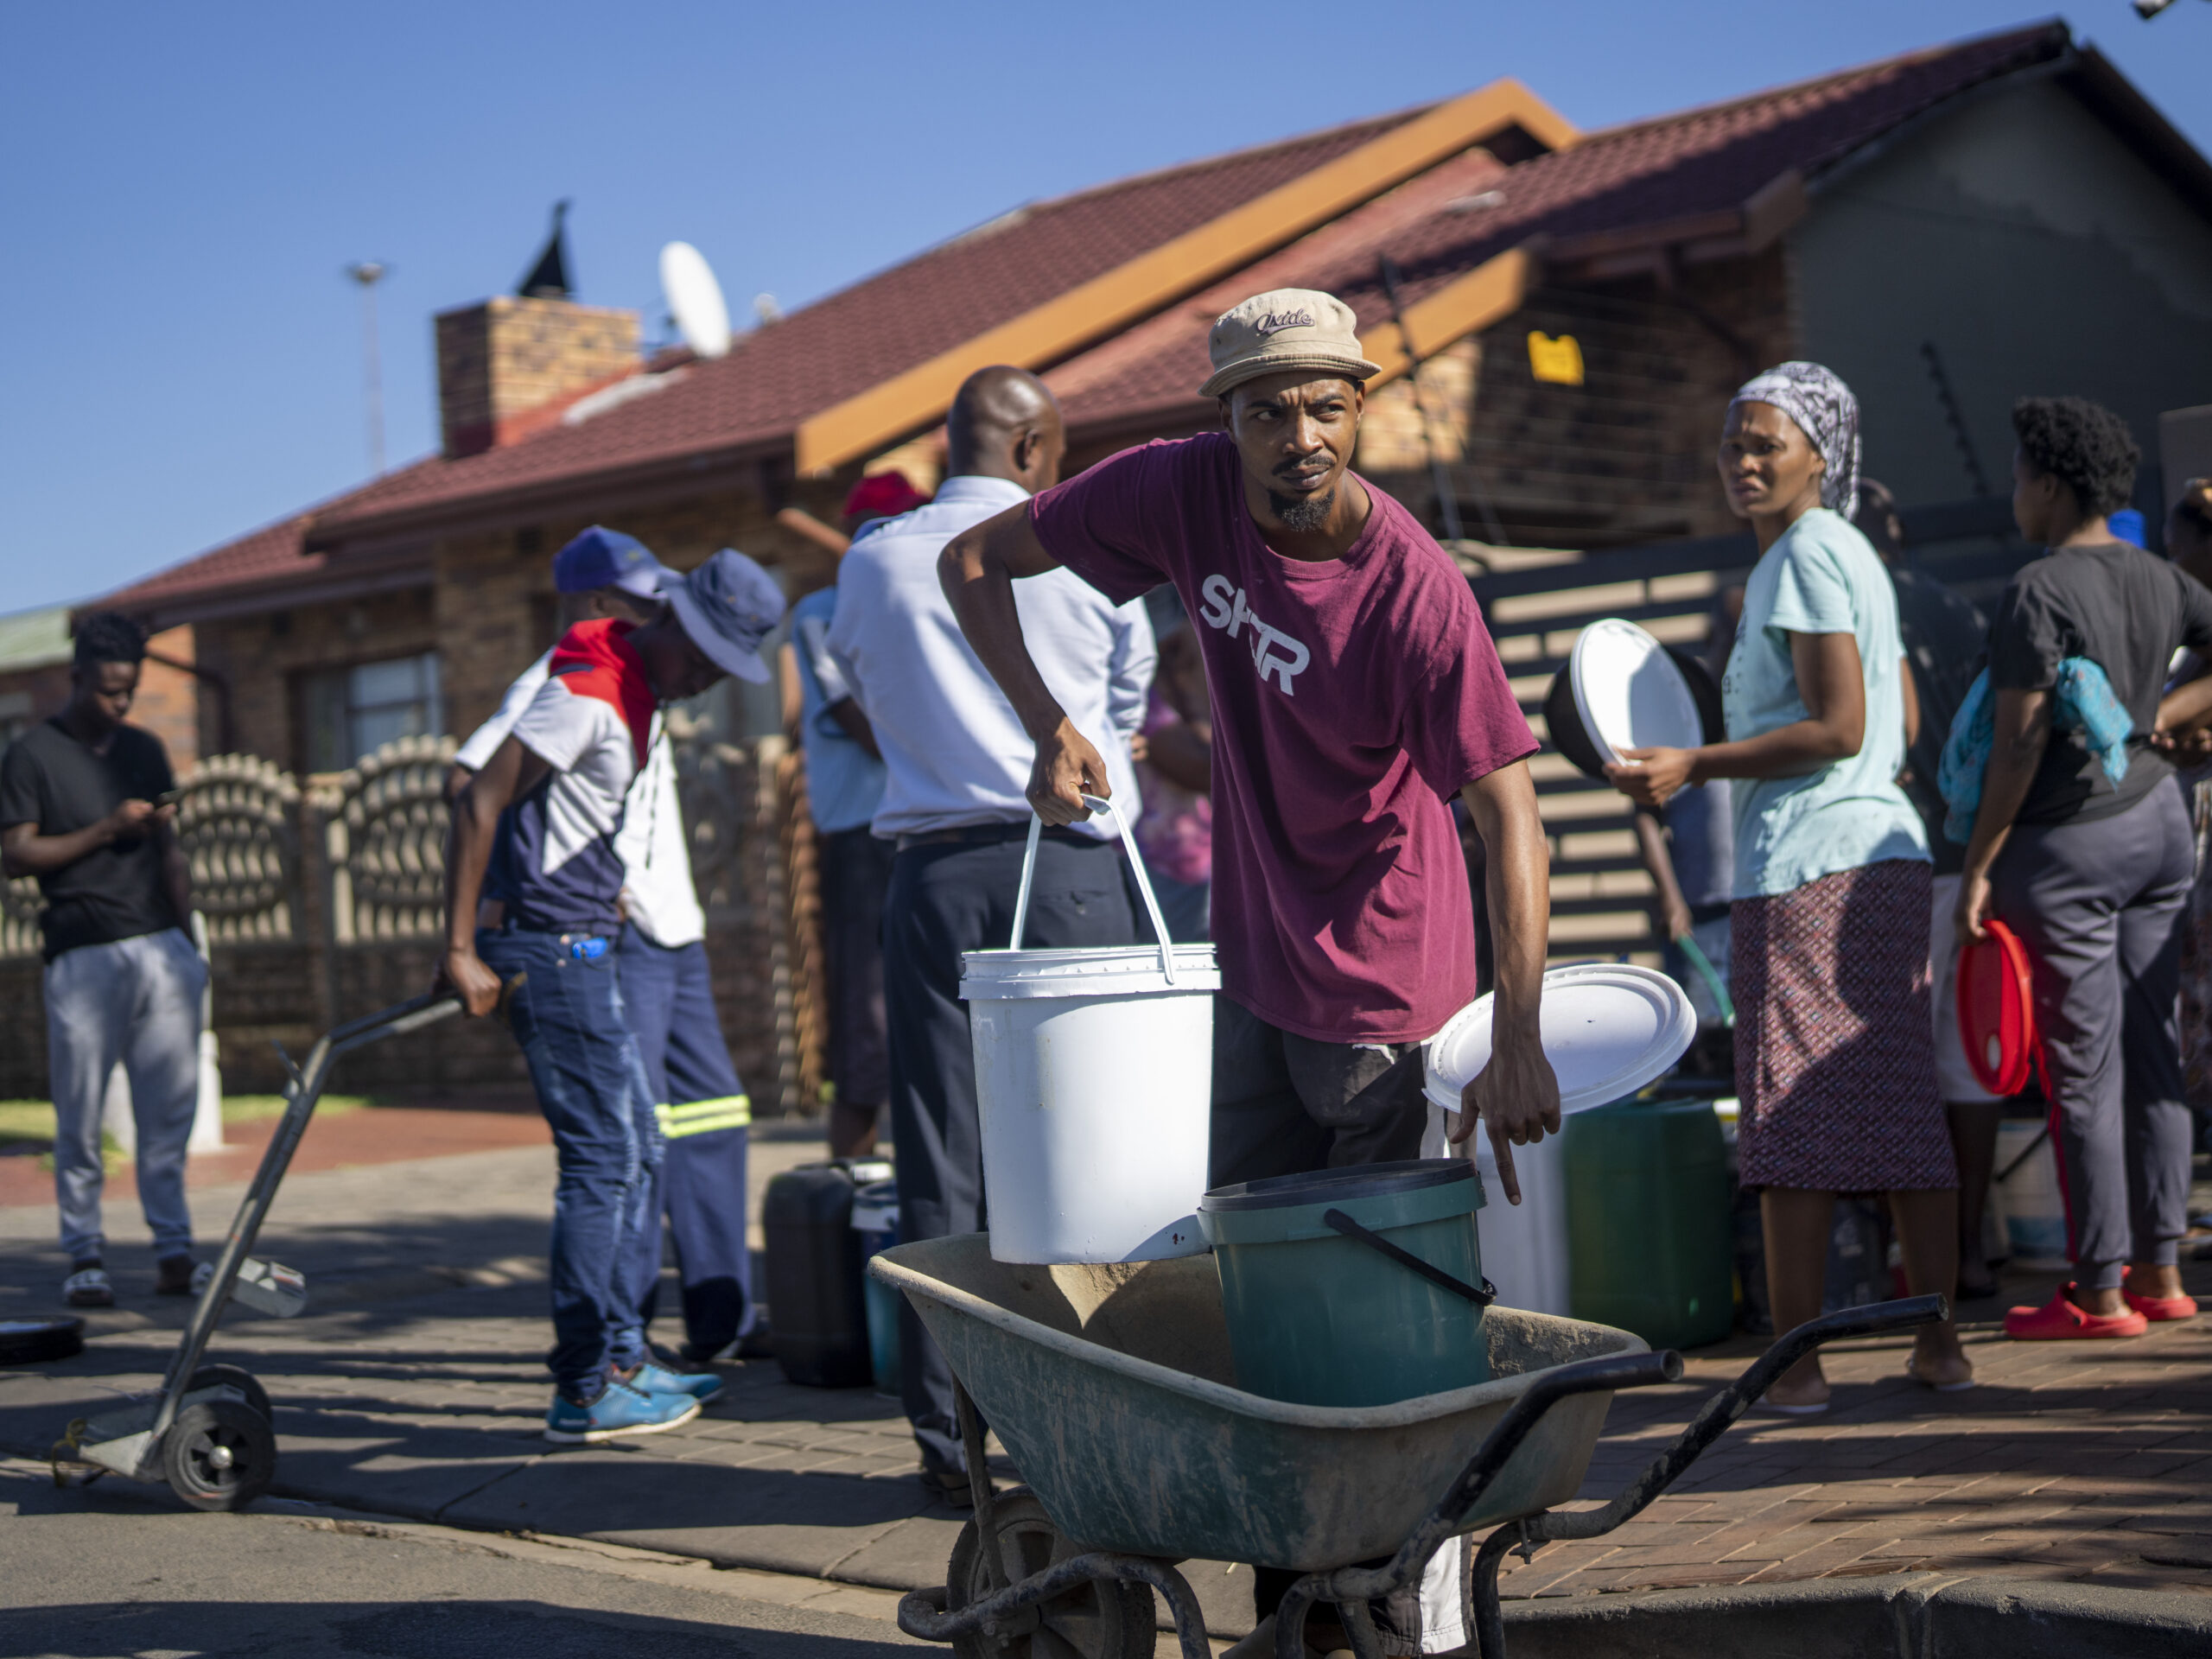 South Africans have had to line up for water as the country's largest city, Johannesburg, confronts a collapse of its water system affecting millions of people.